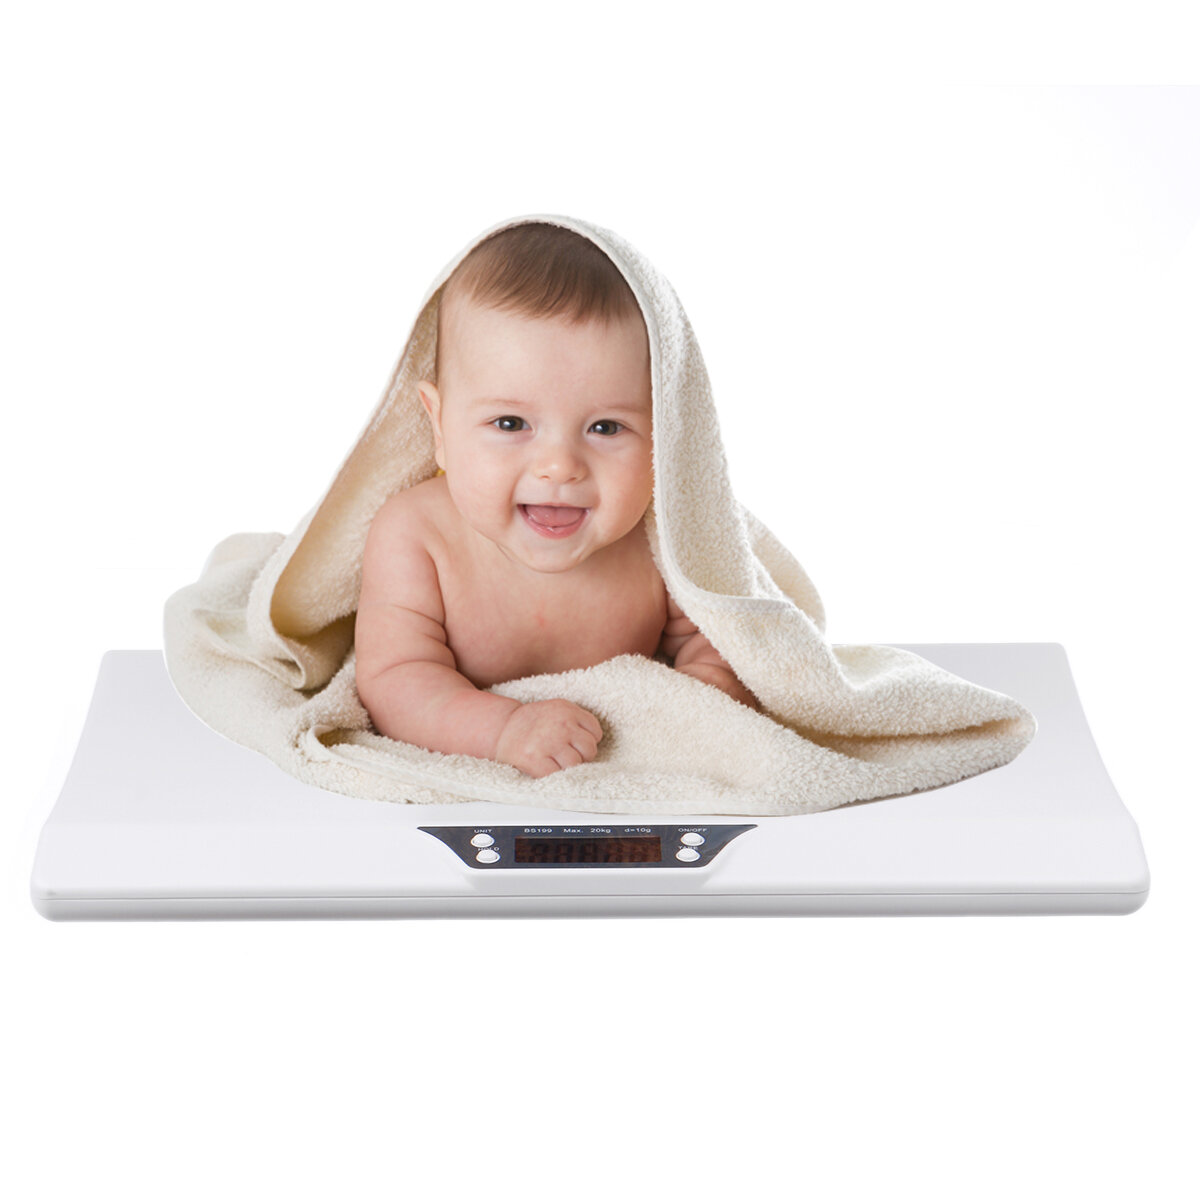 Smart Weigh 44lbx0.4oz Comfort Digital Baby Scale Infants Toddlers LCD Display Digital Baby Scale Electronic Weigh for B